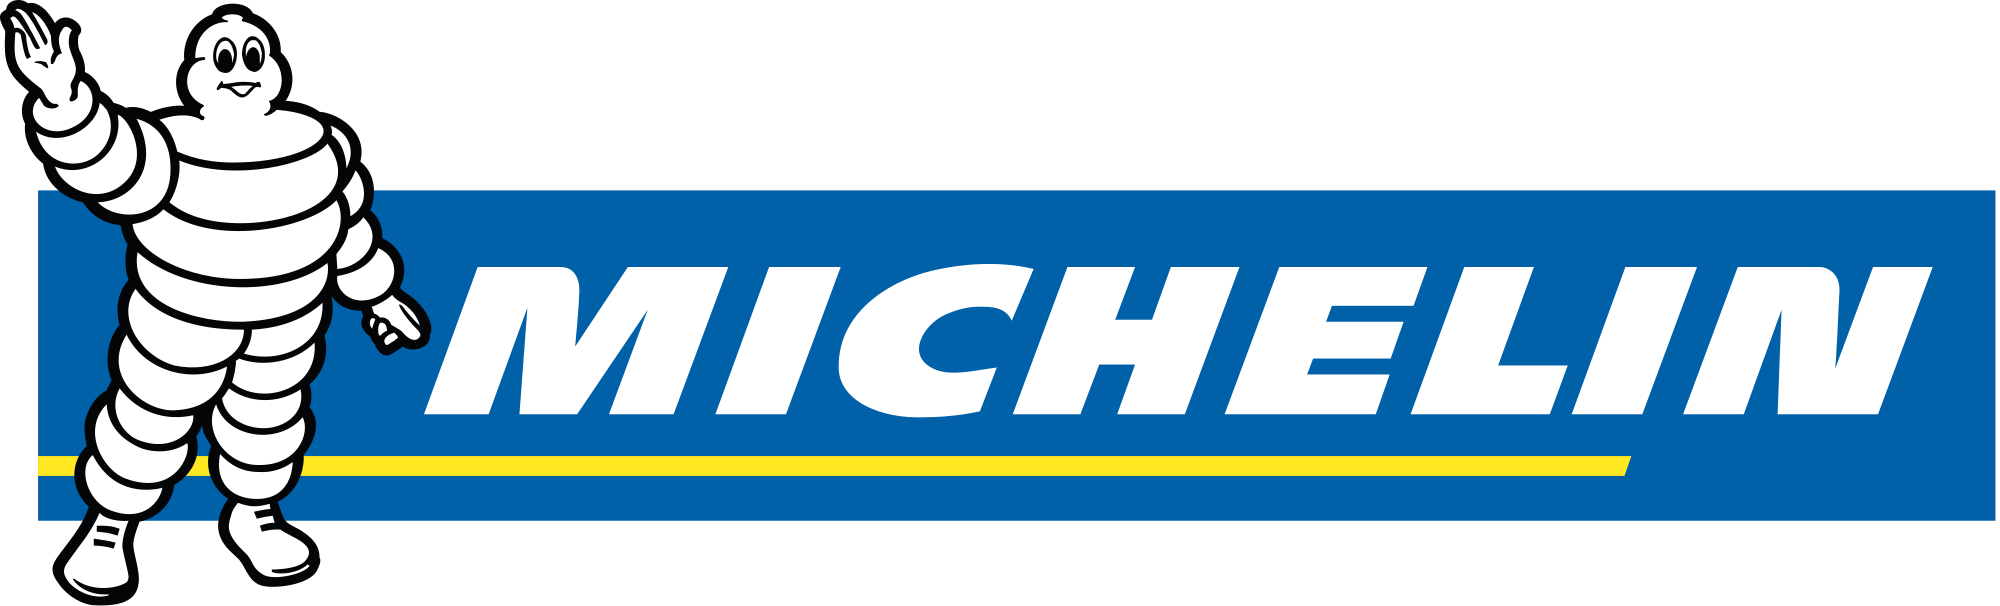 Michelin Tires - Michelin Tires, Transparent background PNG HD thumbnail